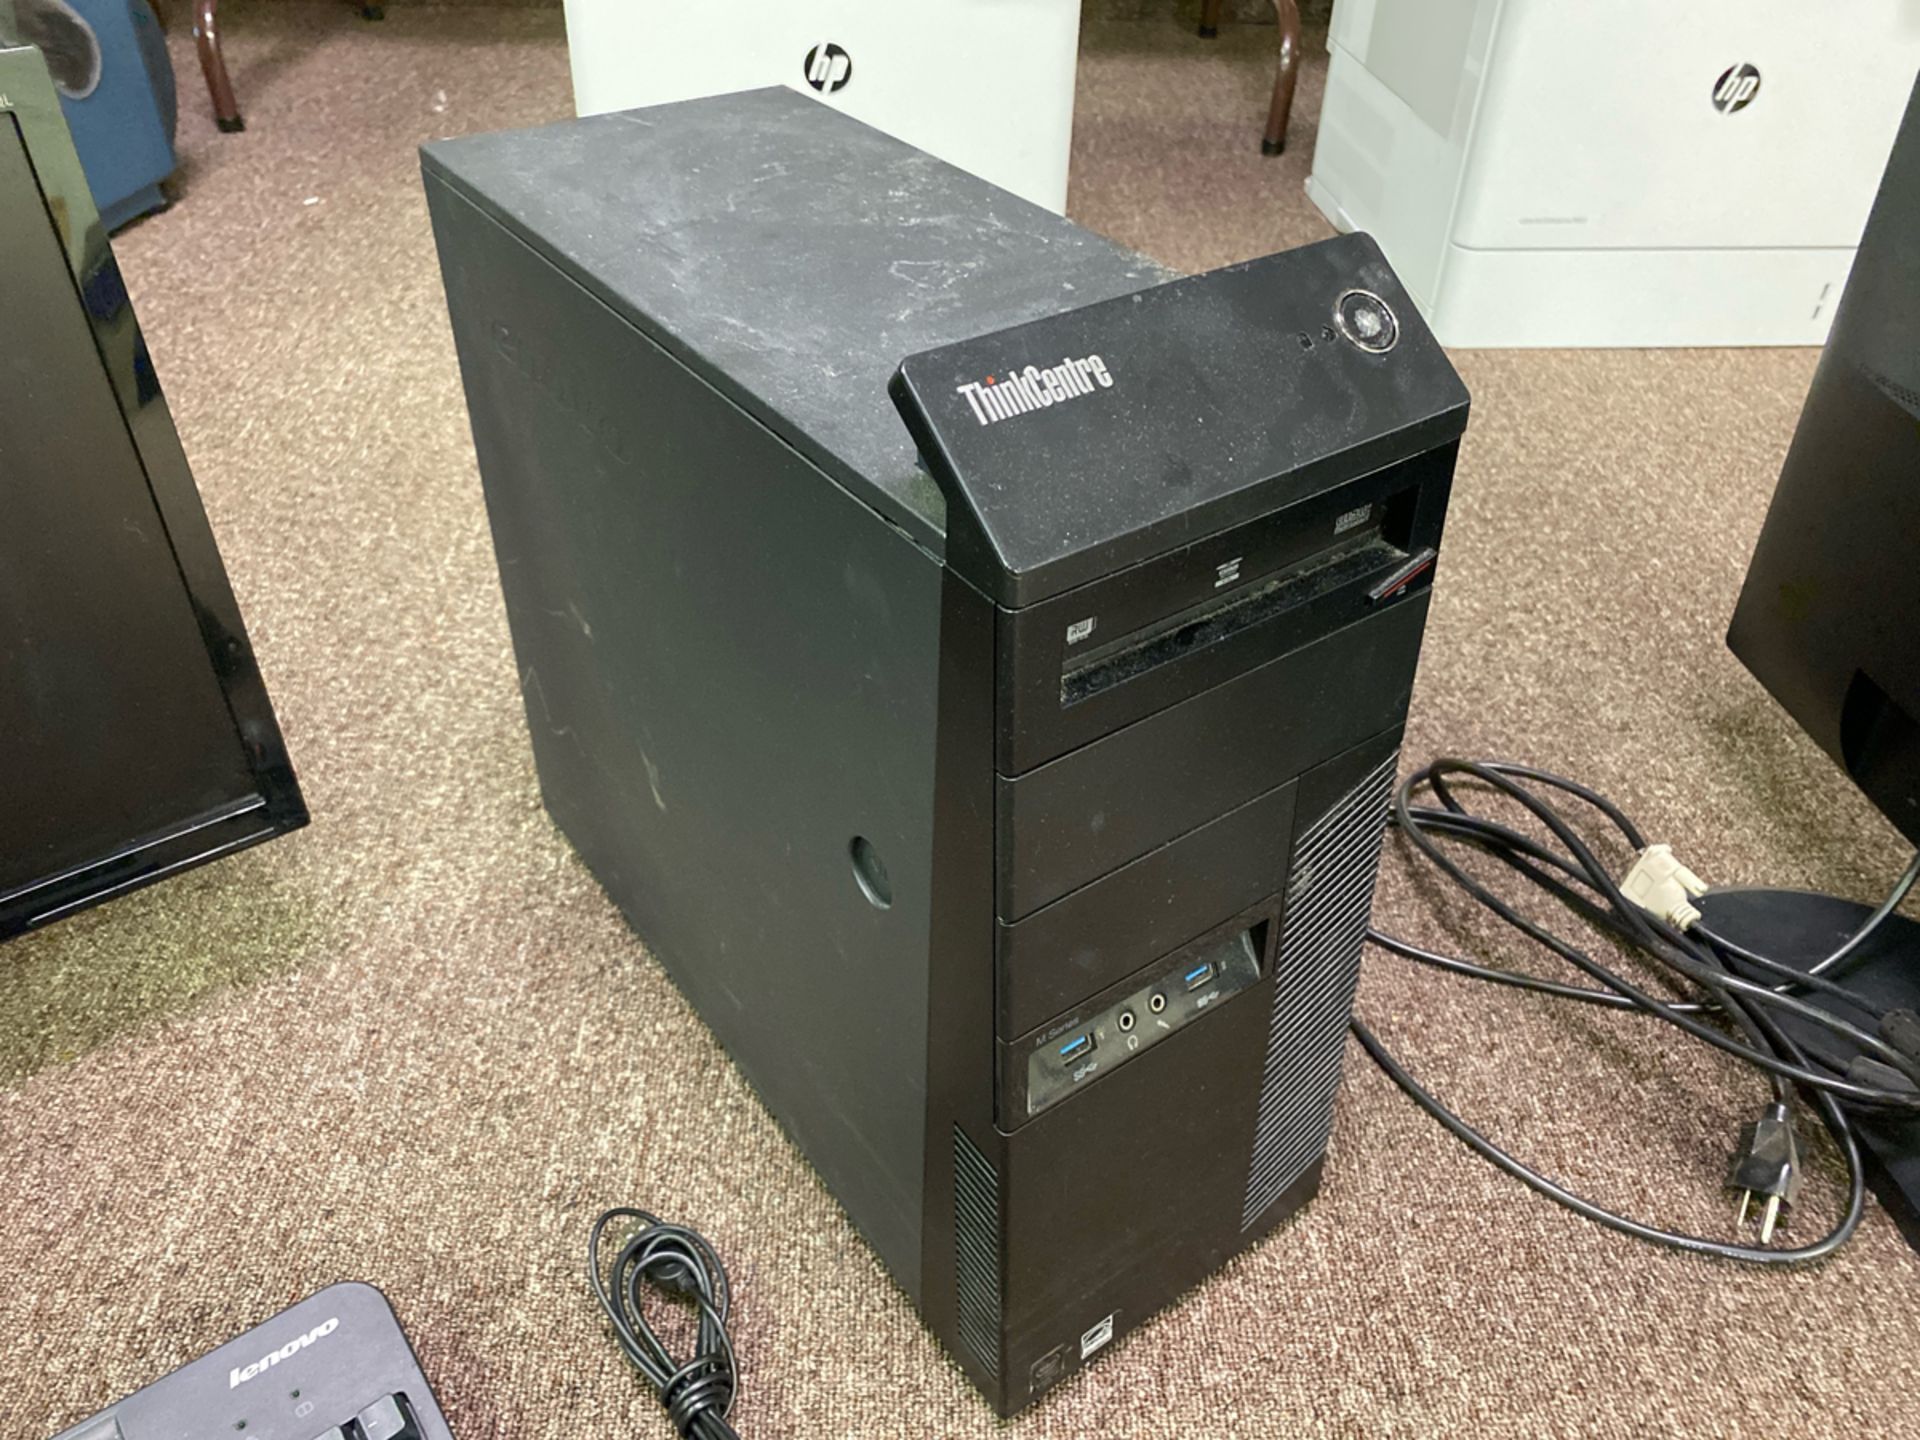 ThinkCentre i7 vPro Computer - Image 2 of 4